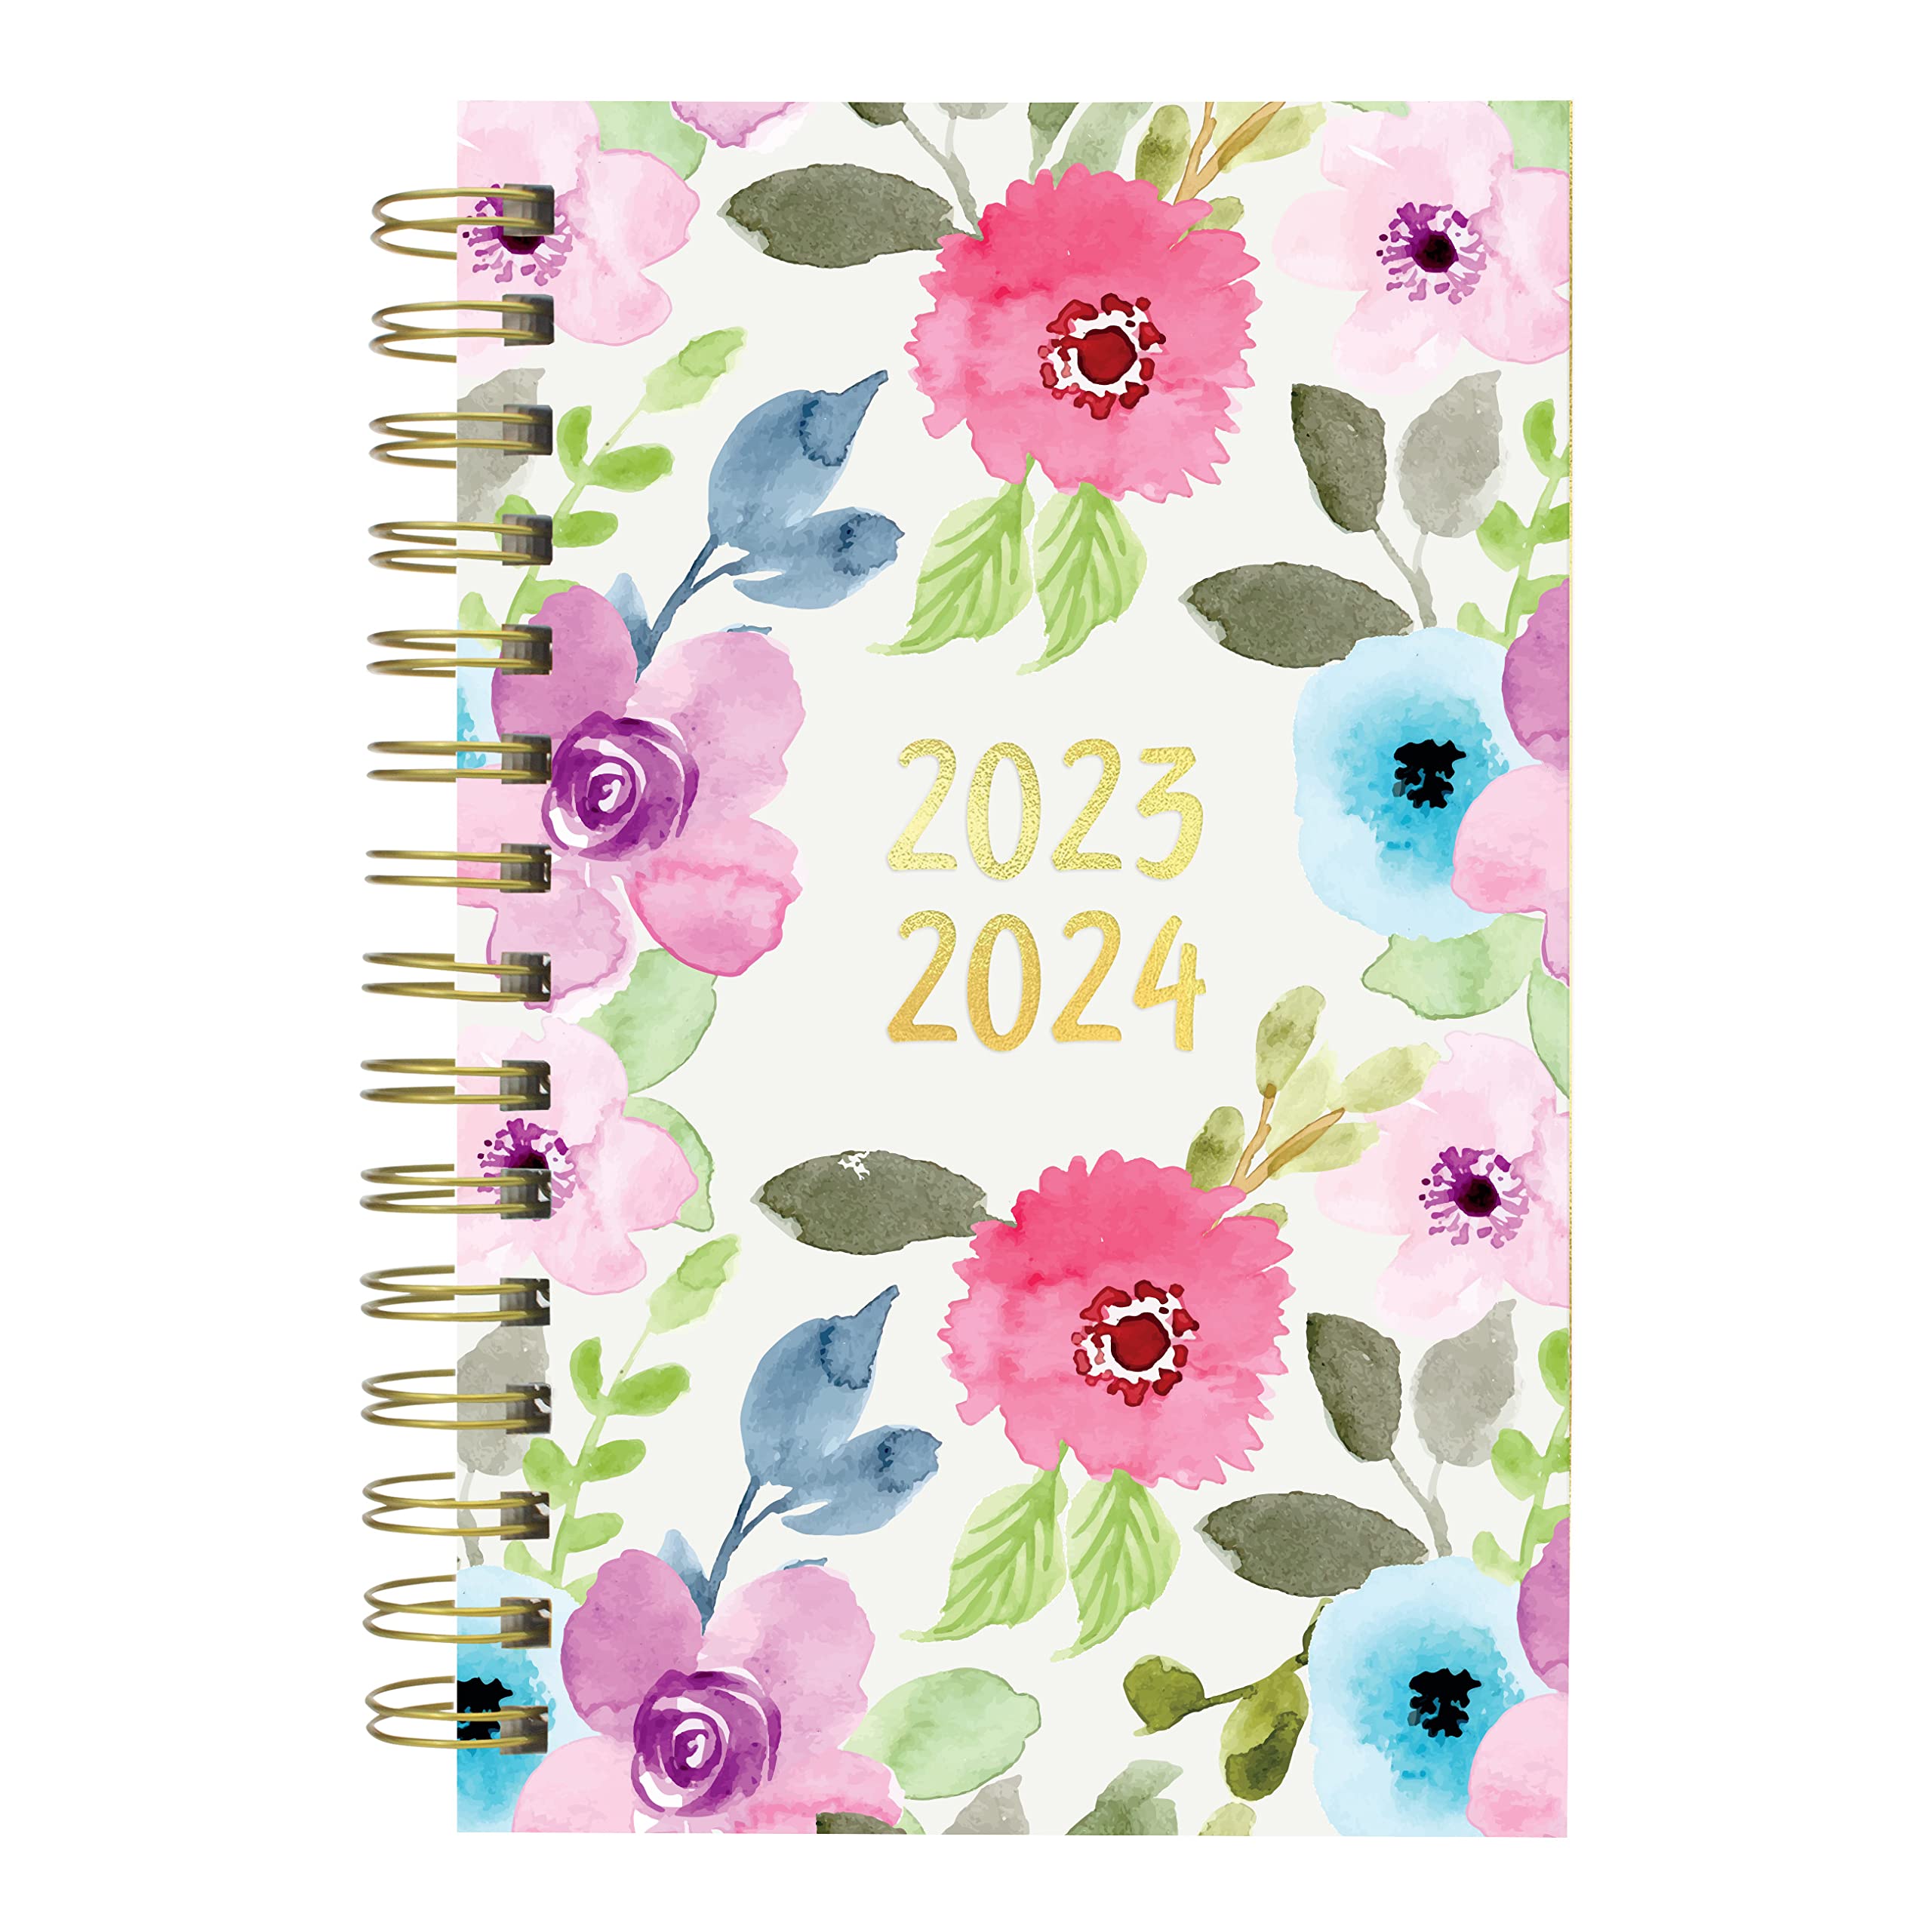 Blueline Essential Academic Daily/Monthly Planner, August 2023 to July 2024, Gold Twin-Wire Binding, Poly Cover, 8" x 5", Blossom Design, Pink (CA214PG.01-24)